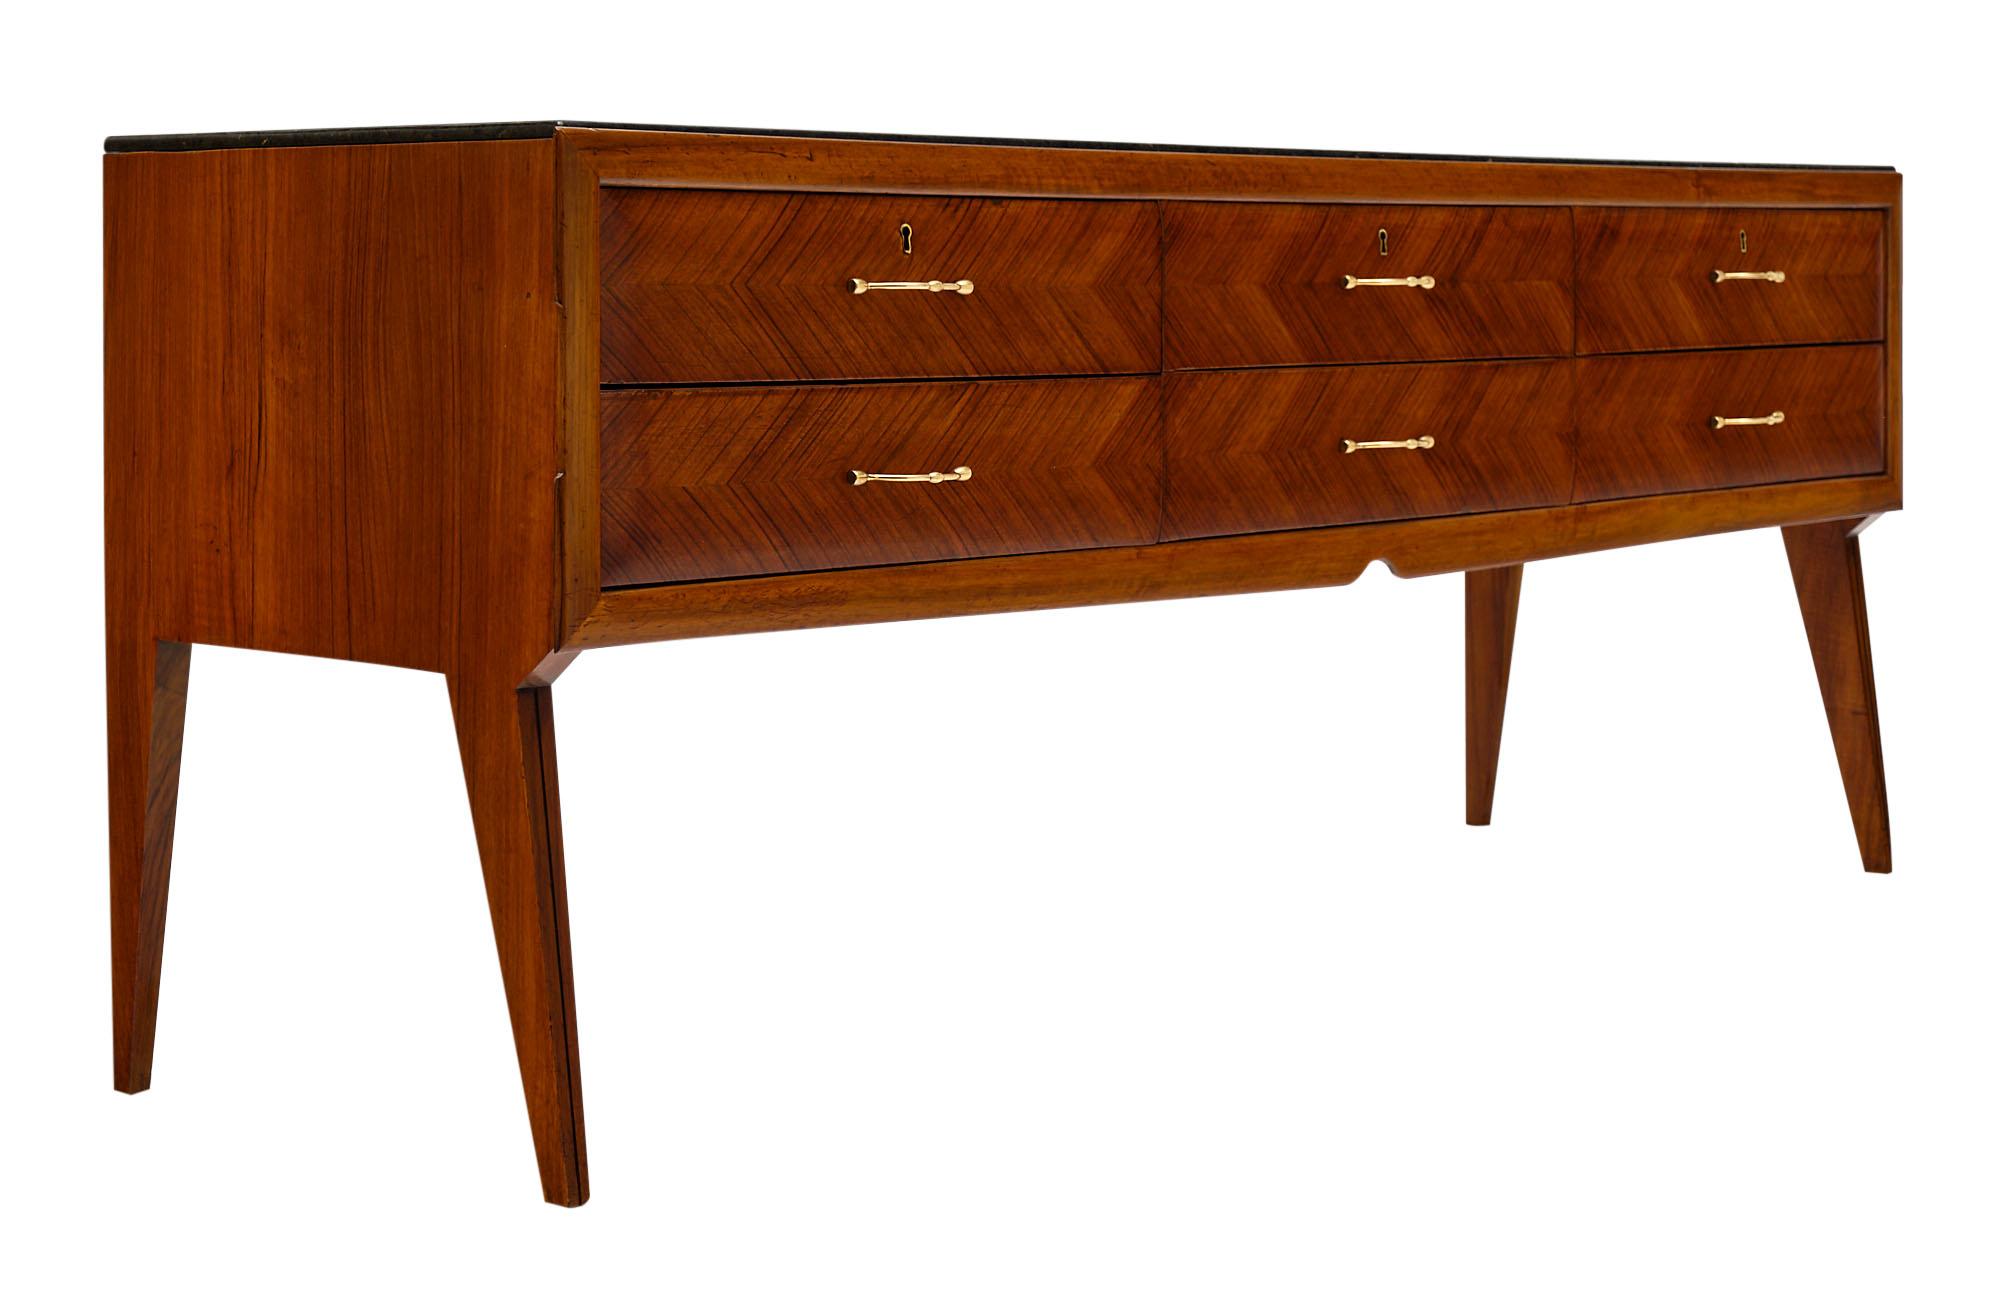 Italian rosewood vintage sideboard with tapered legs and topped with a beveled “terrazzo” granite. The rosewood front is beautifully parqueted and the piece has six drawers.